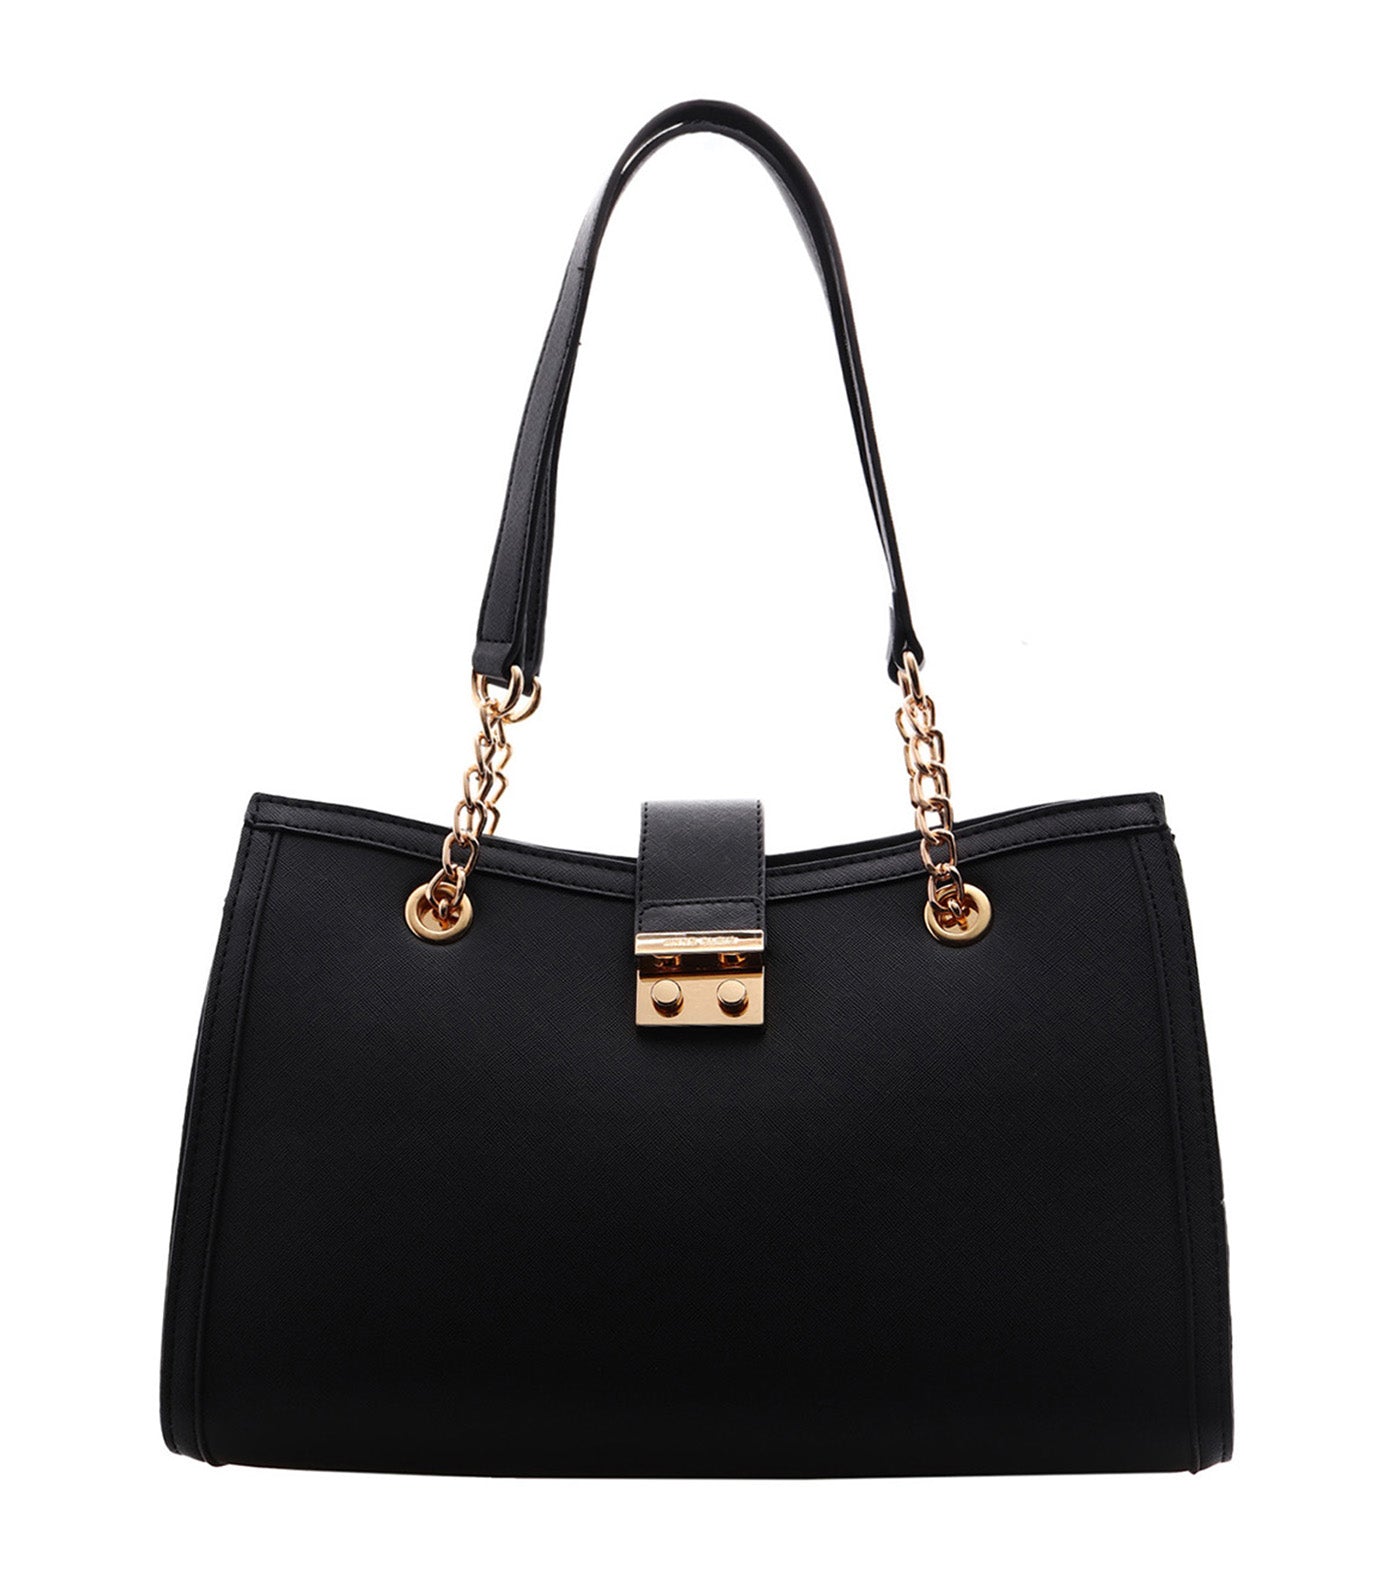 Satchel with Chain Detailing and Push Lock Black